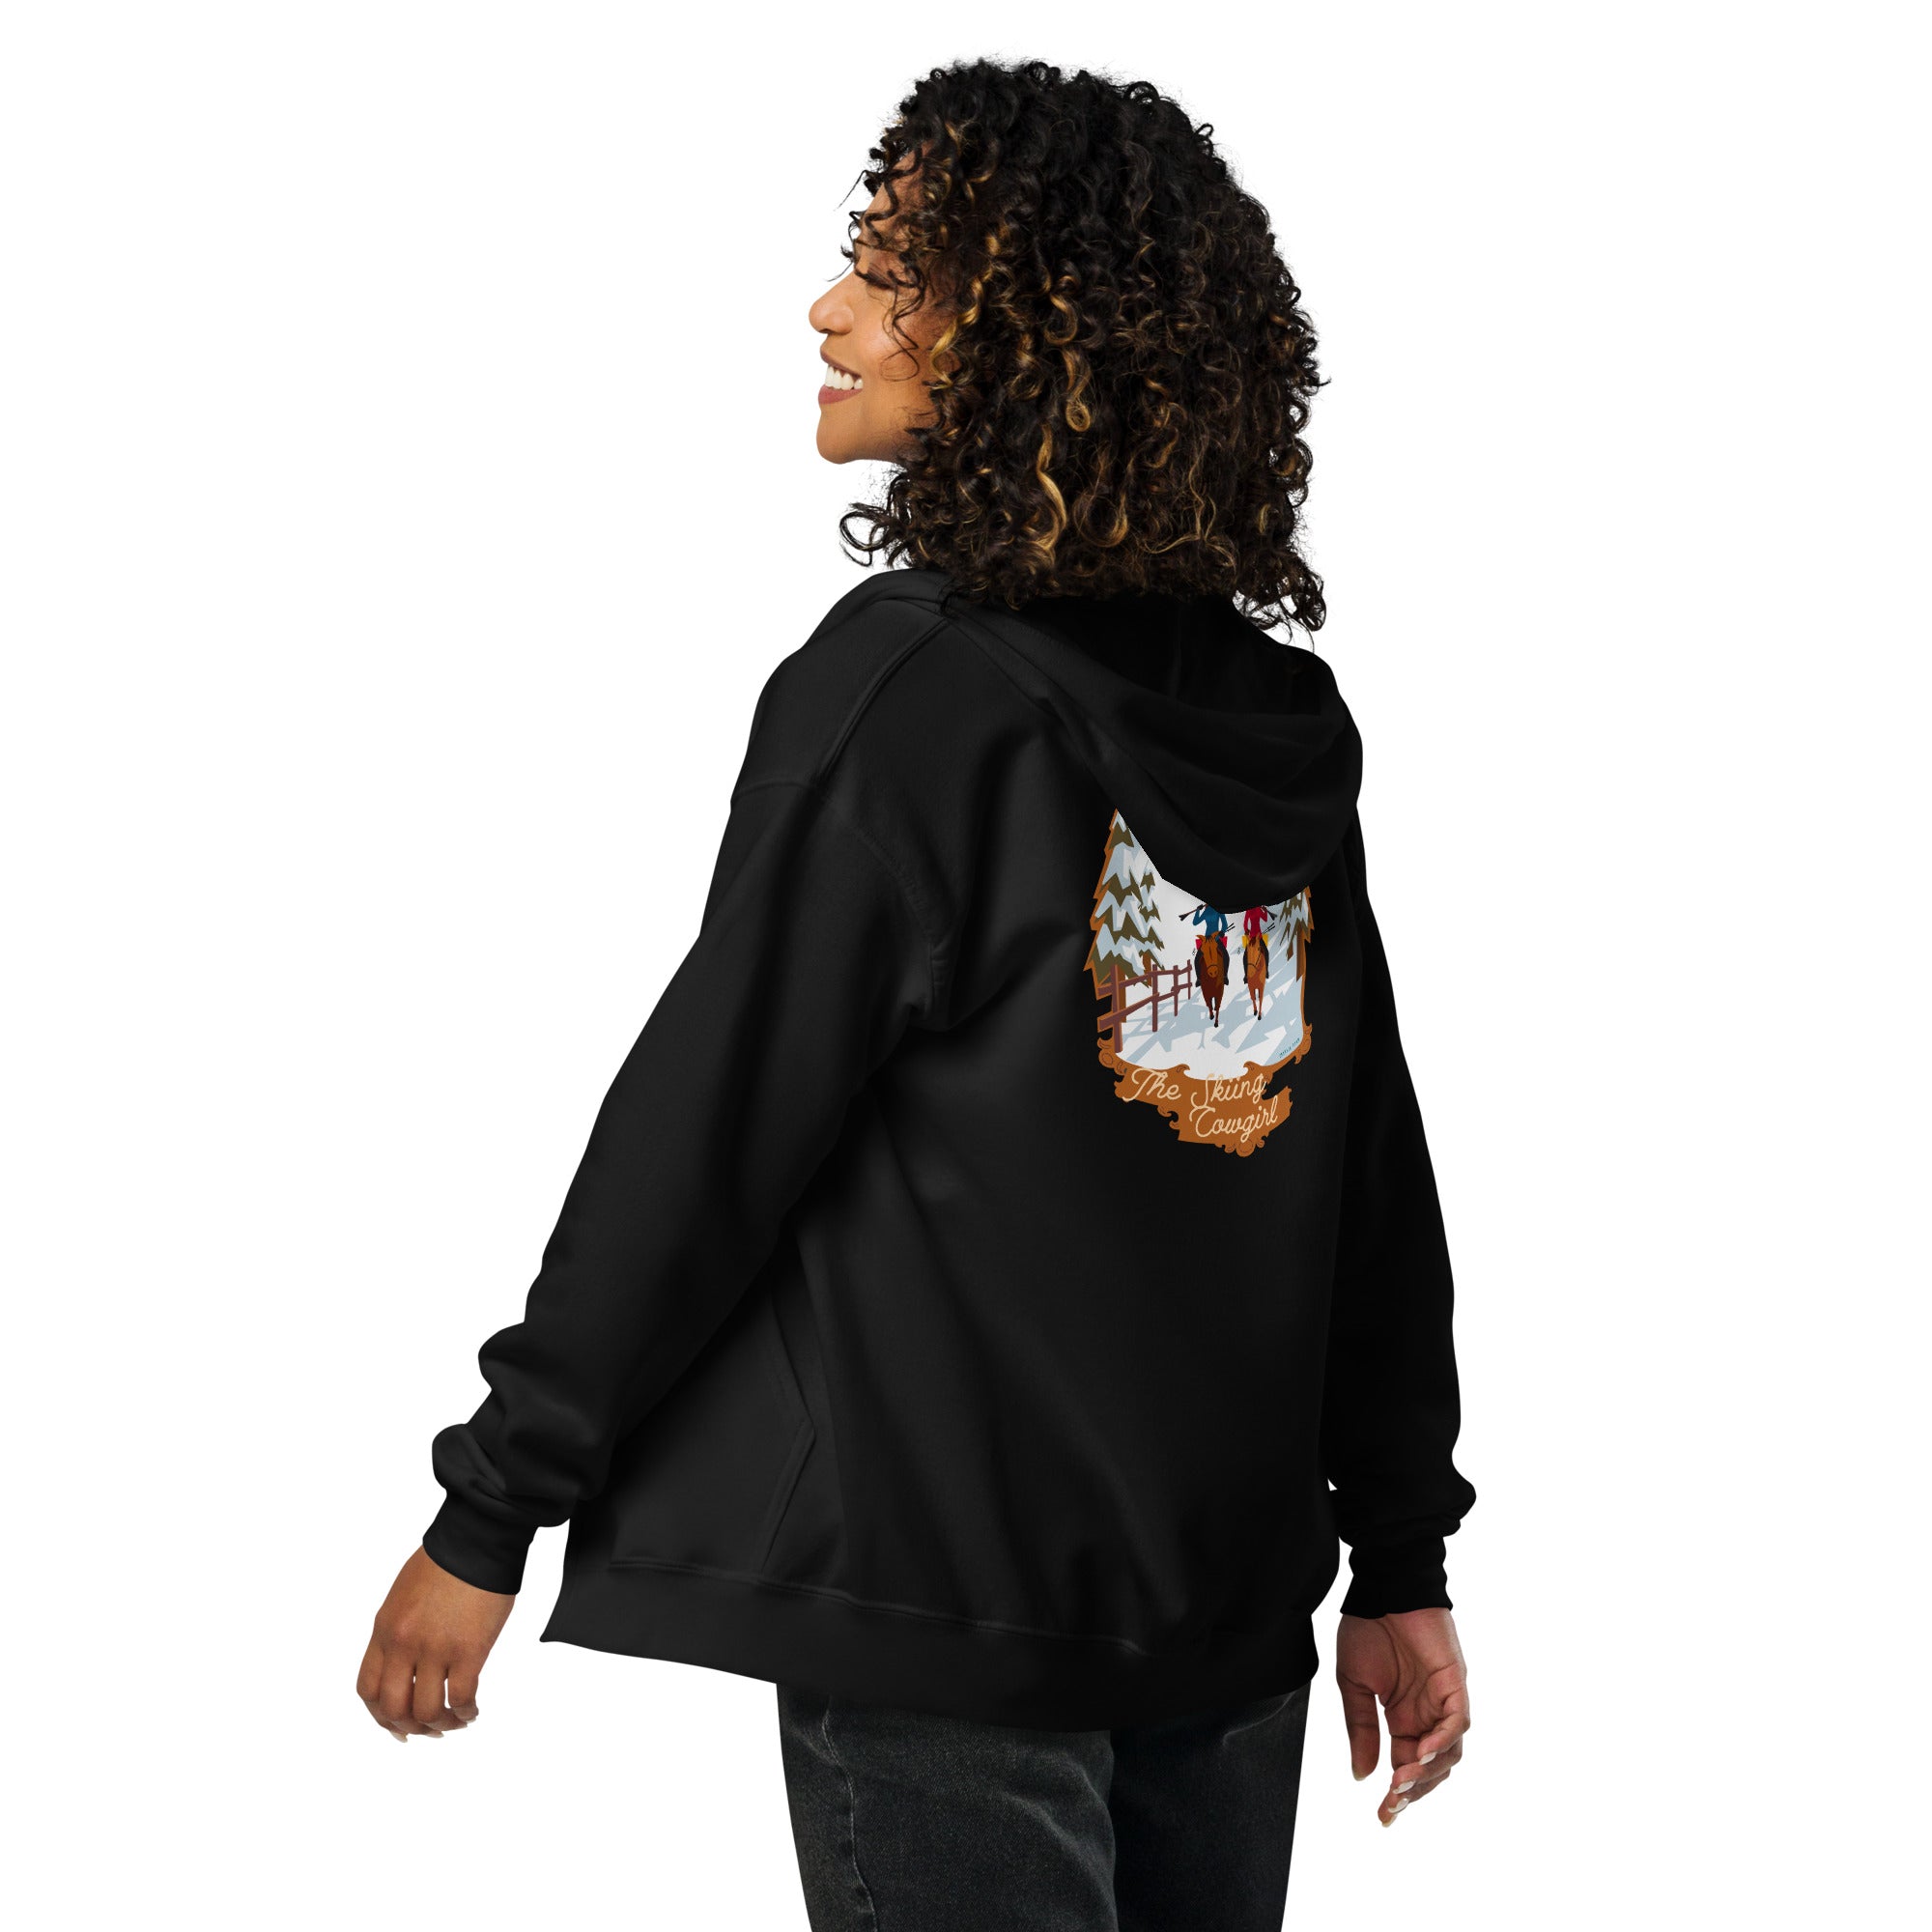 Unisex heavy blend zip hoodie The Skiing Cowgirl (front & back)